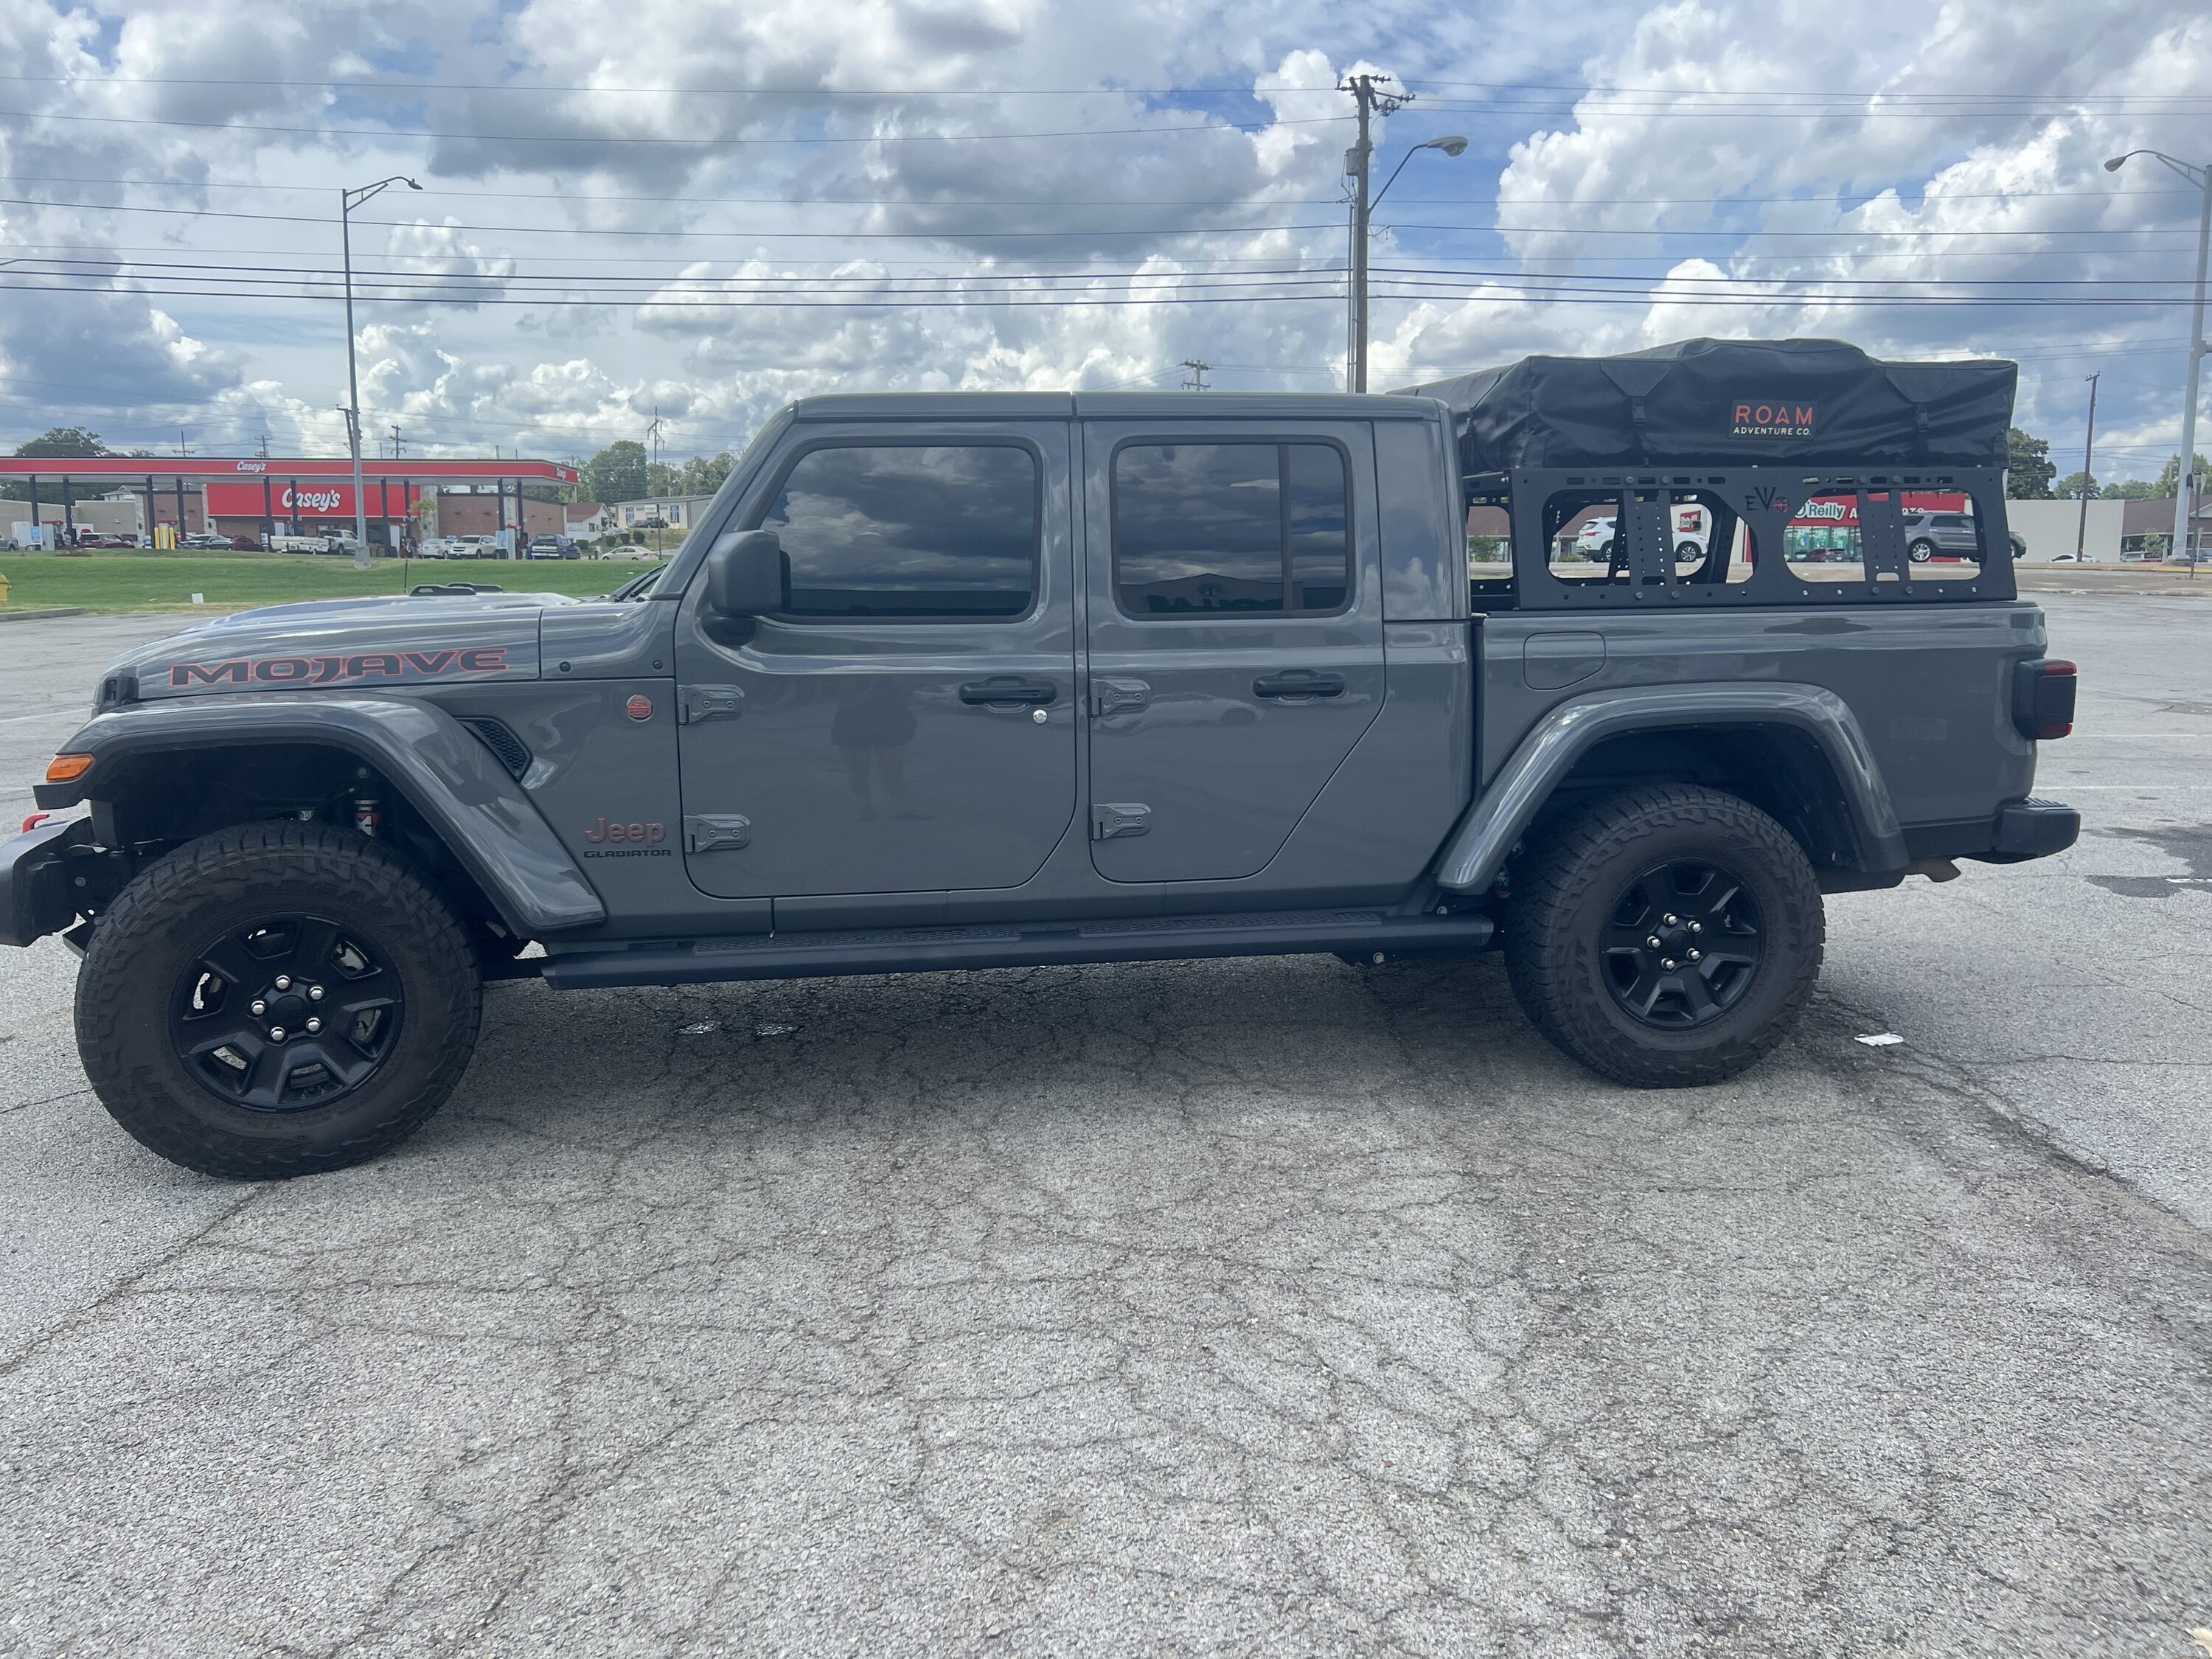 Jeep Gladiator Slow Sting Gray Overlanding Build - Jeeper479479 IMG_3809